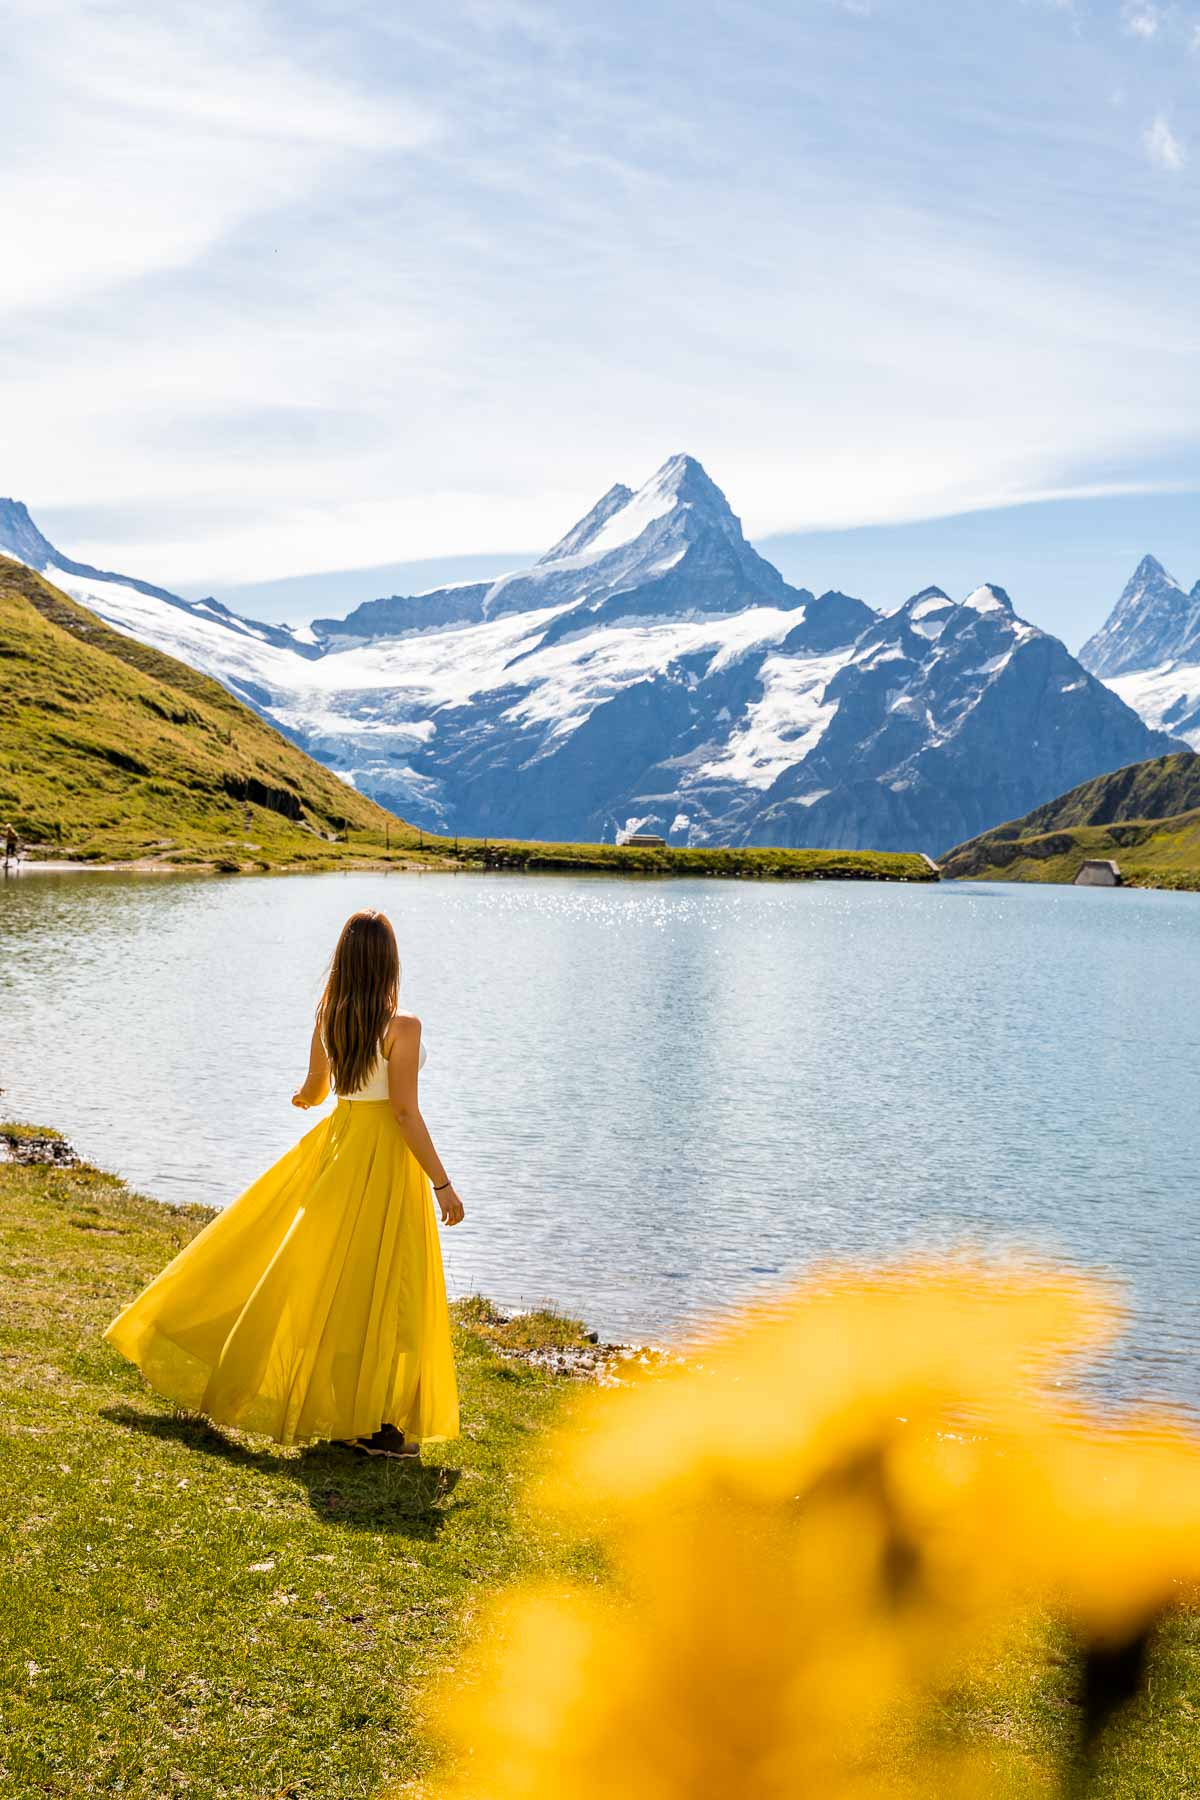 Girl in a yellow dress in front of Bachalpsee, Switzerland